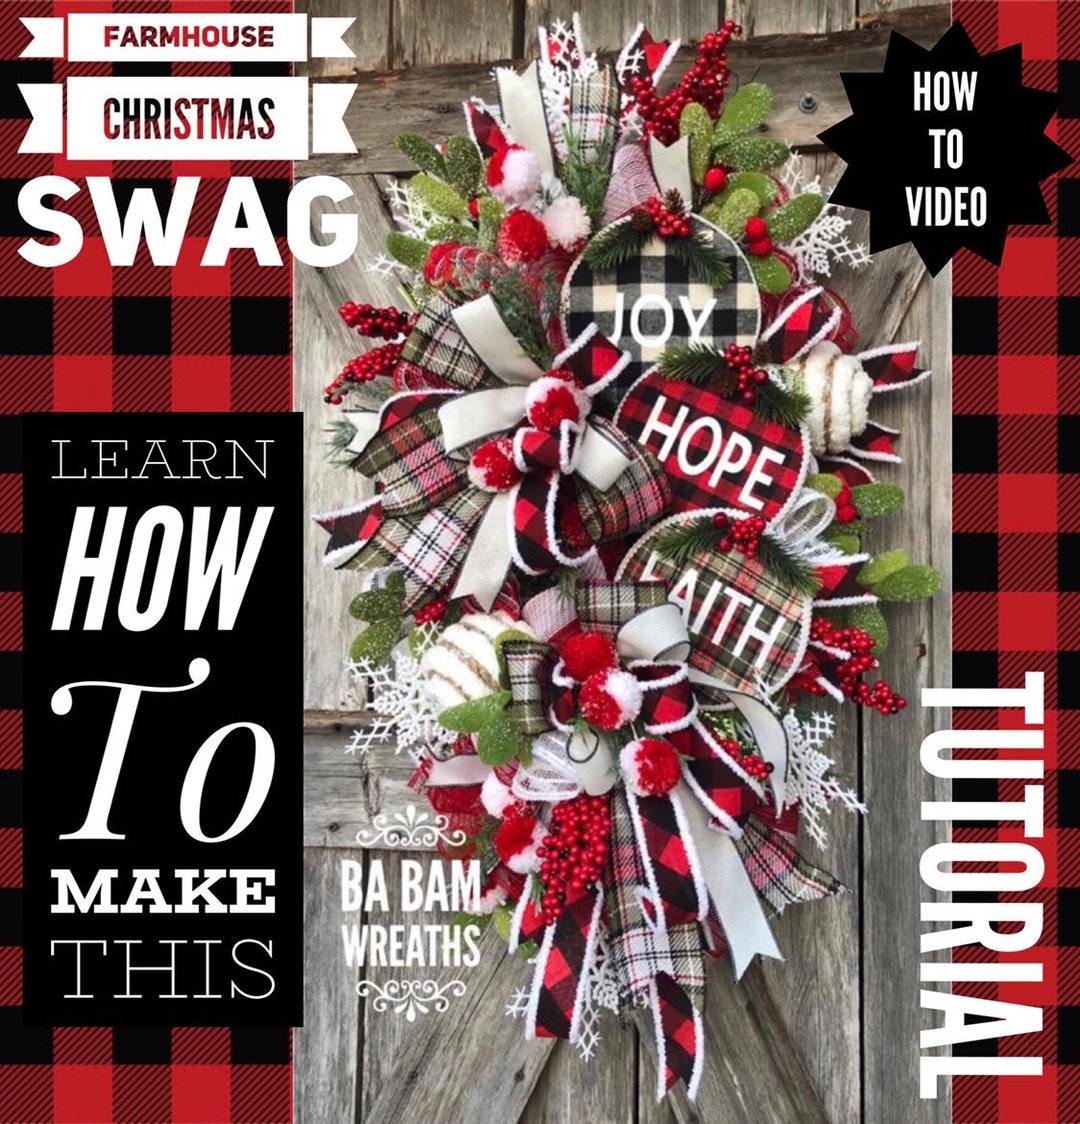 How to Video How to Wreath Wreath Tutorial Christmas image